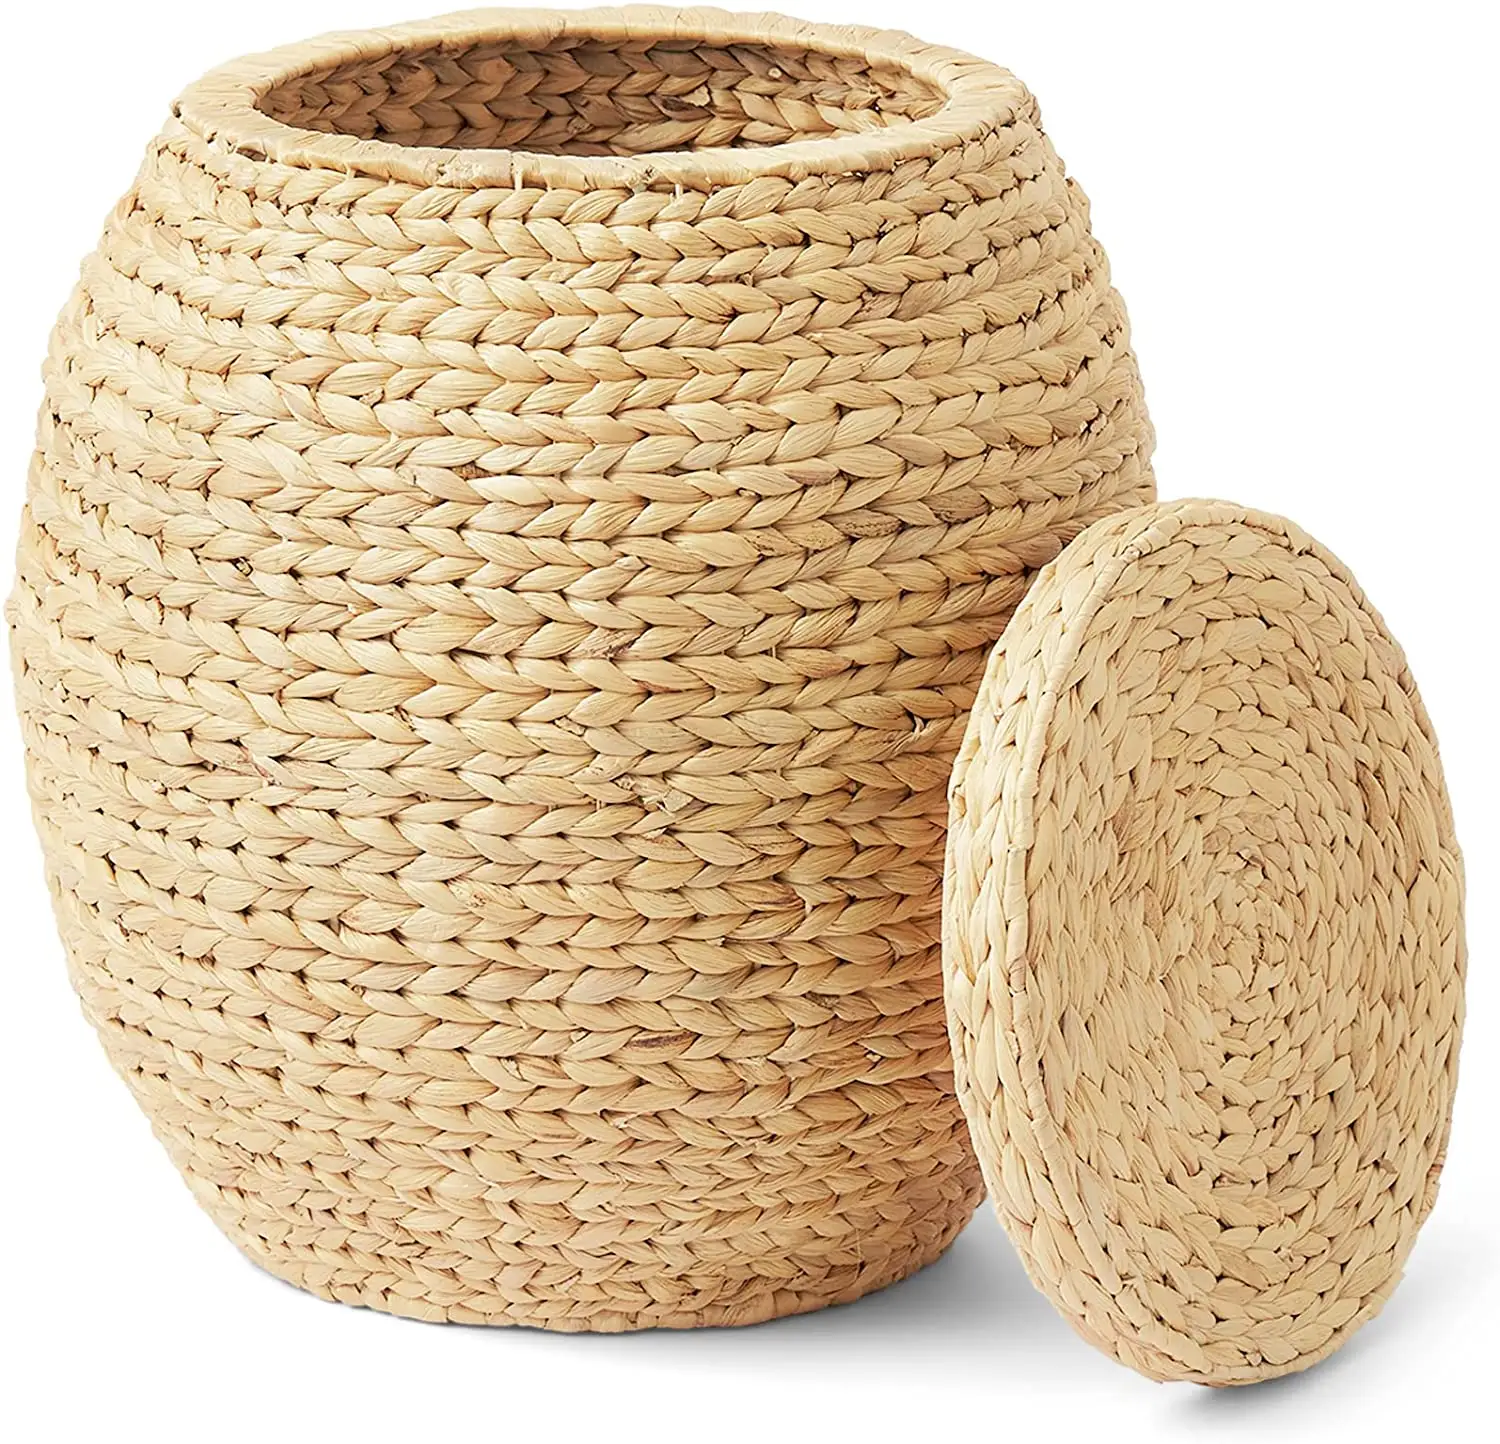 Wicker Storage Baskets - Natural Multipurpose Barrel Storage Tub with Lid, Woven Water Hyacinth Basket for Organizing